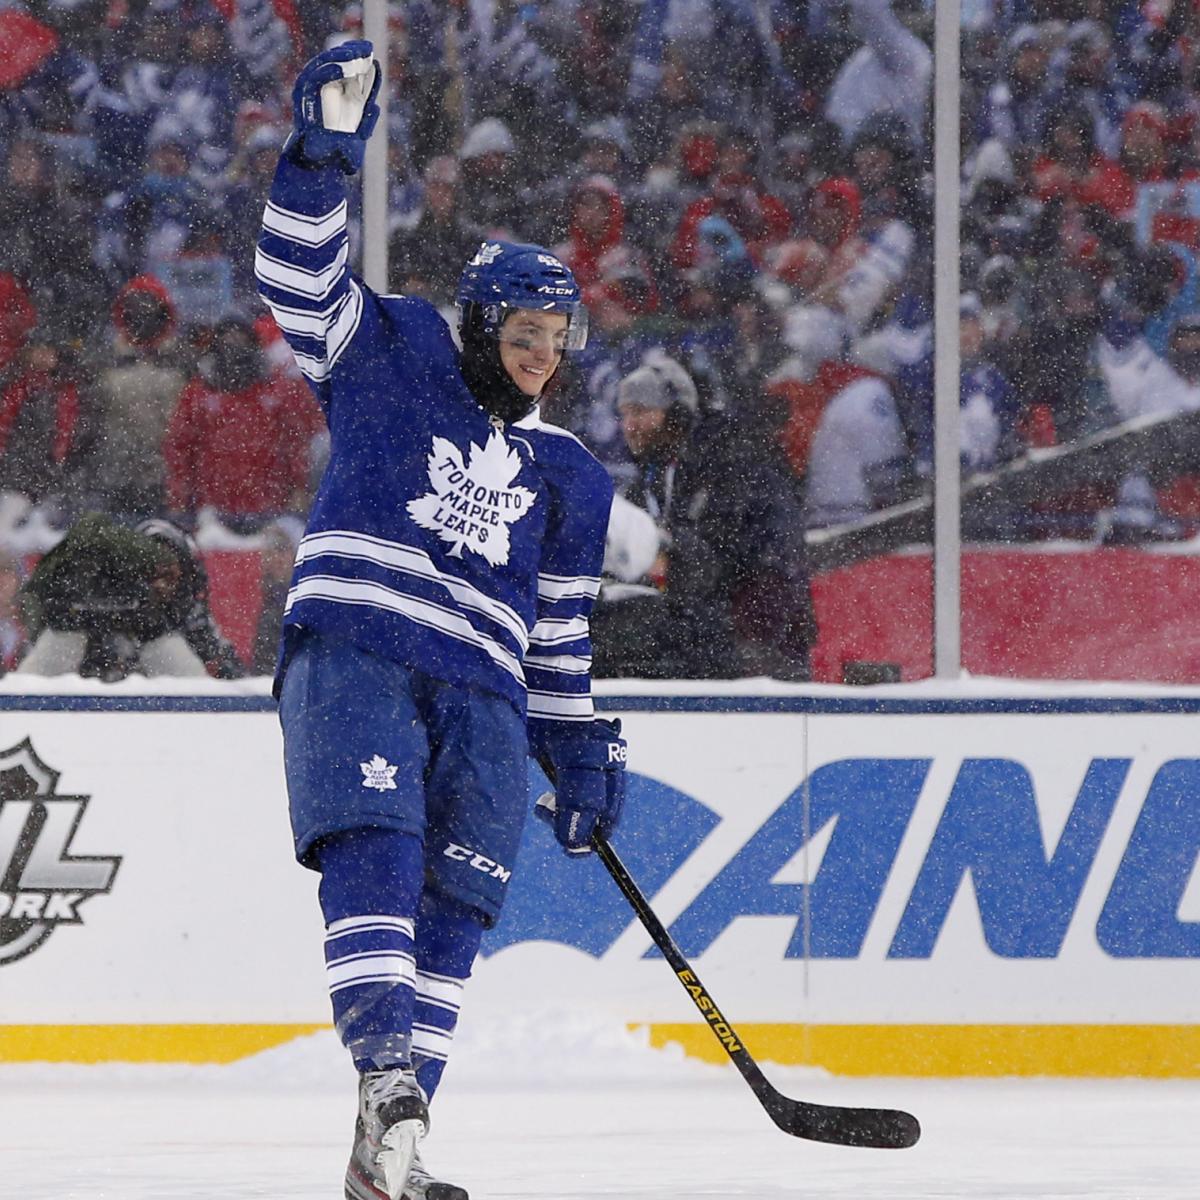 Practice Used Toronto Maple Leafs 2014 Winter Classic Game NHL